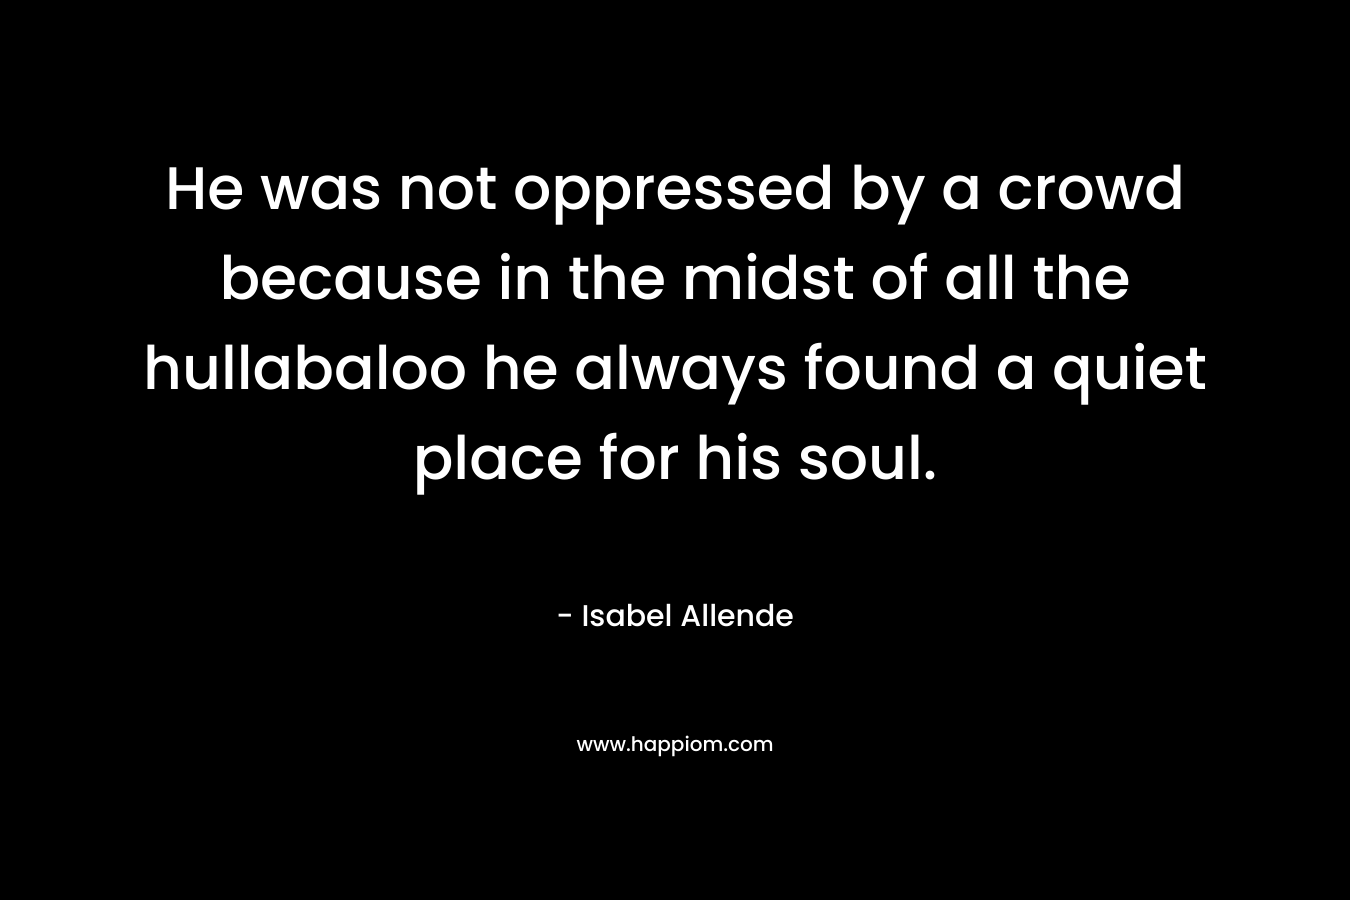 He was not oppressed by a crowd because in the midst of all the hullabaloo he always found a quiet place for his soul. 